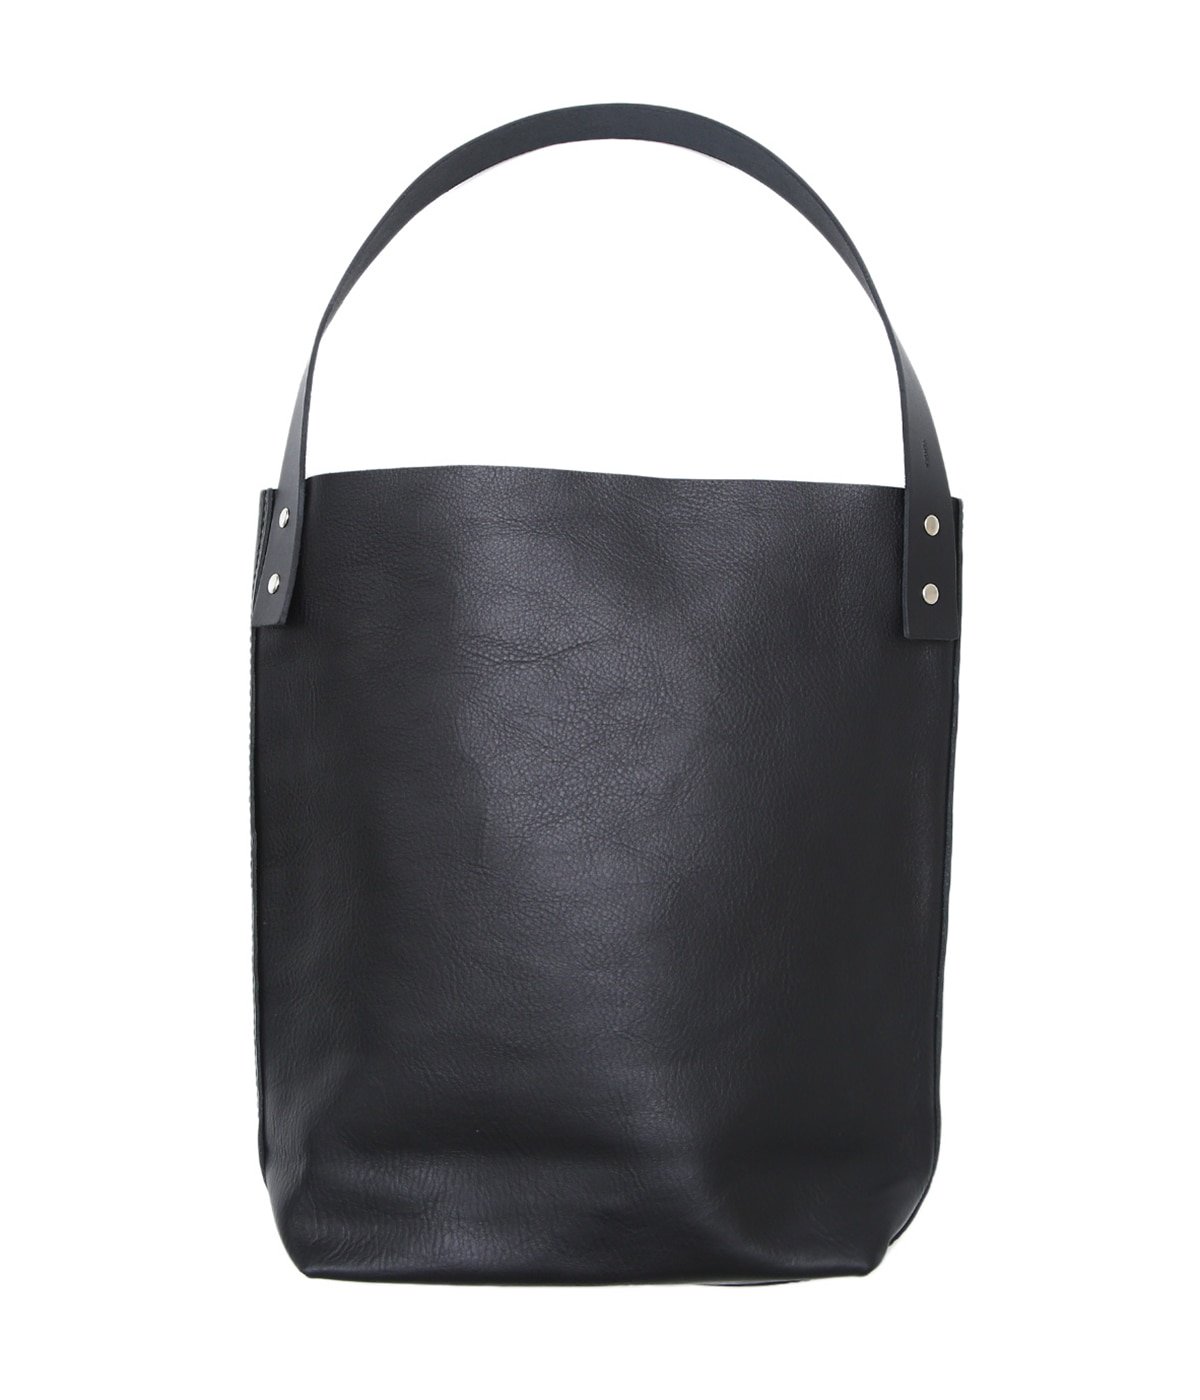 BAGUETTE TOTE LEATHER | TEMBEA(テンベア) / バッグ トートバッグ (メンズ レディース)の通販 -  ARKnets(アークネッツ) 公式通販 【正規取扱店】